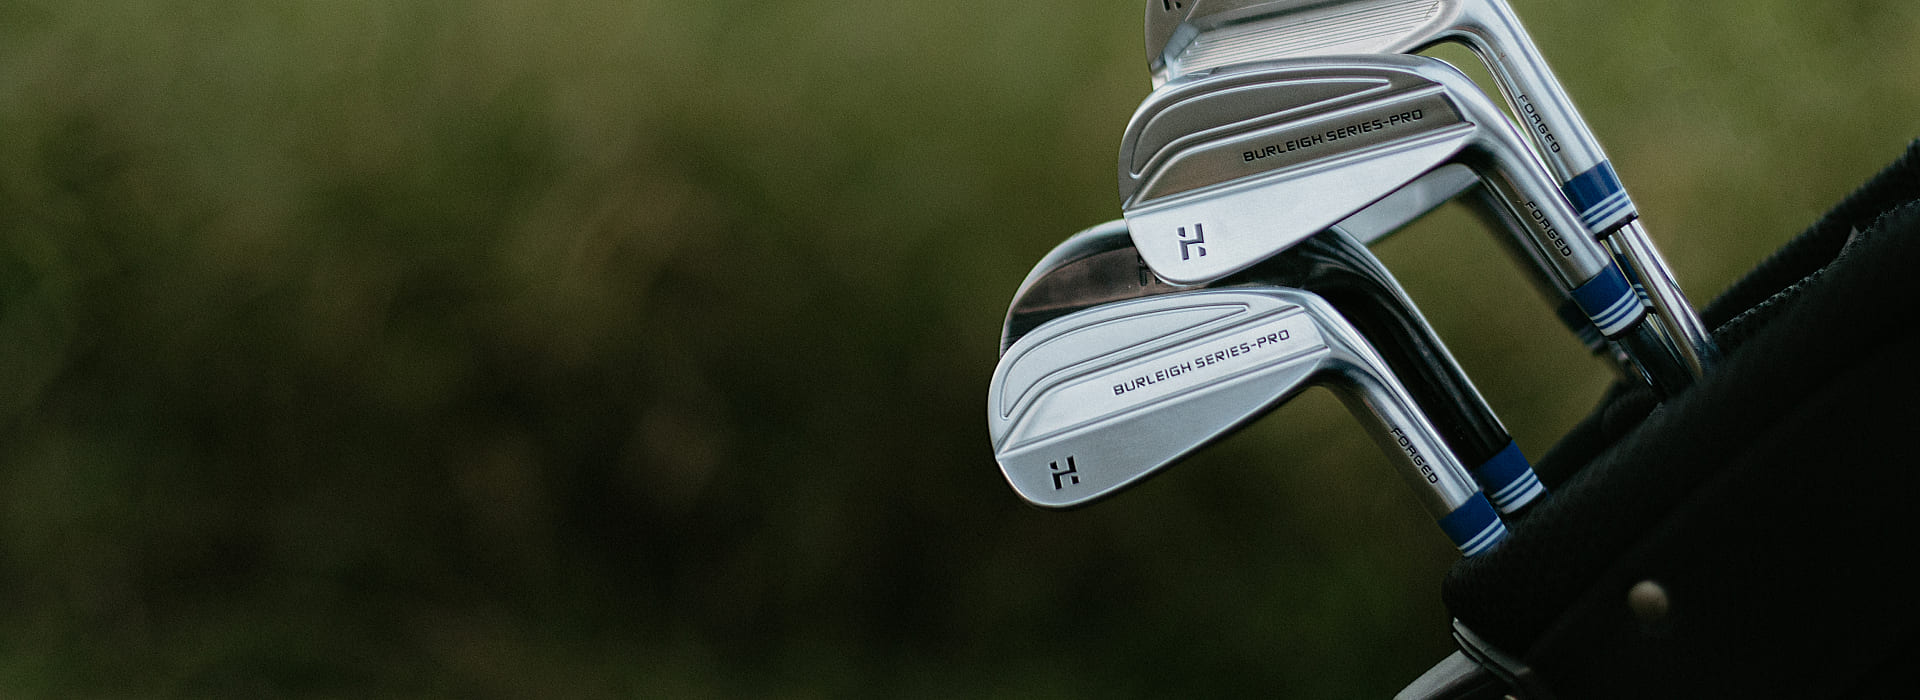 Haitch Golf Pro Series Irons | Custom Fitted golf Clubs | Golf Clubs Online